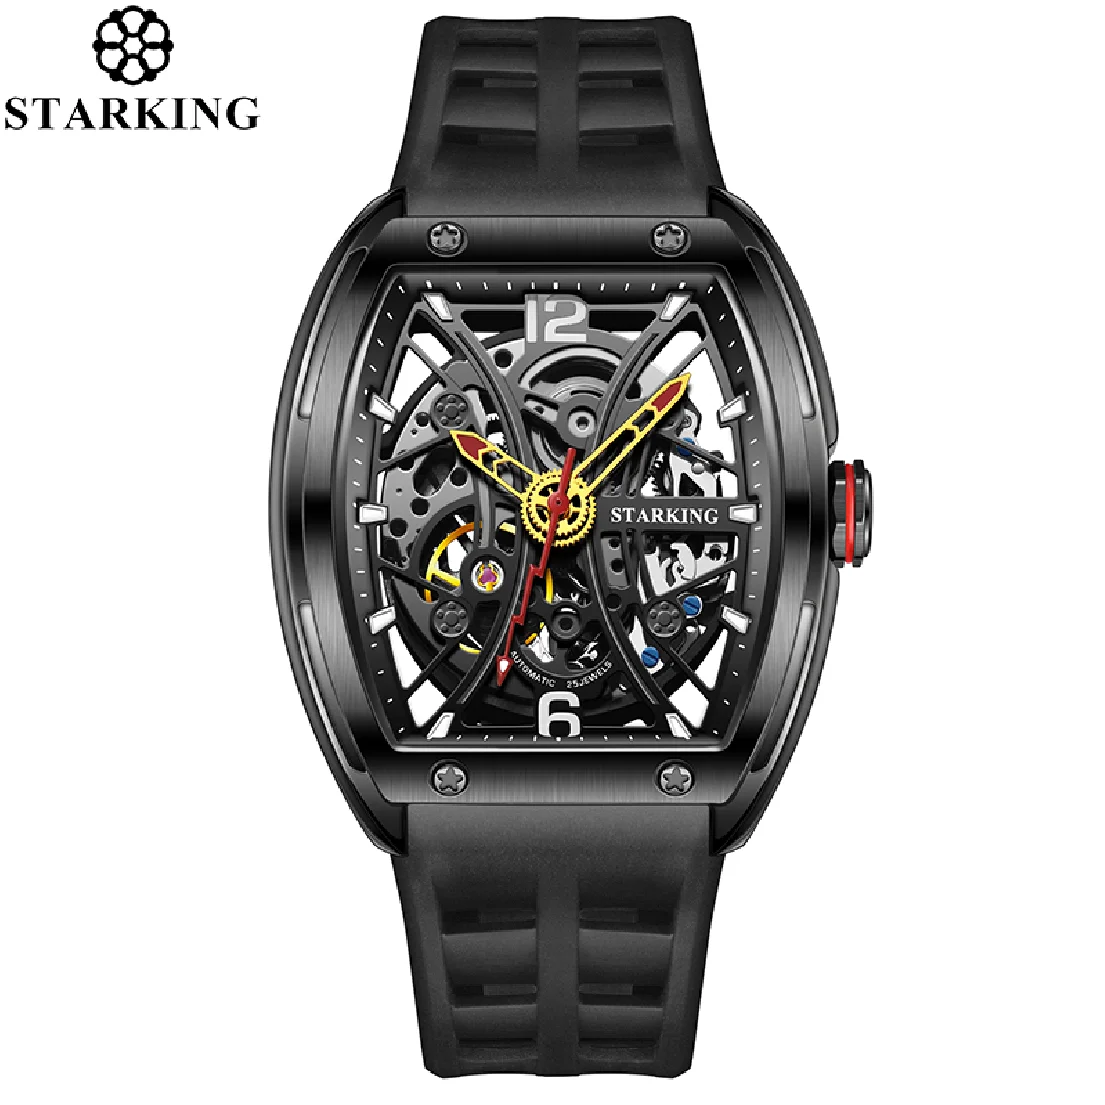 

STARKING Mechanical Watch For Men Top Brand New In Skeleton Watches Luminous Automatic Wristwatch Sports Silicone Clock Relogio